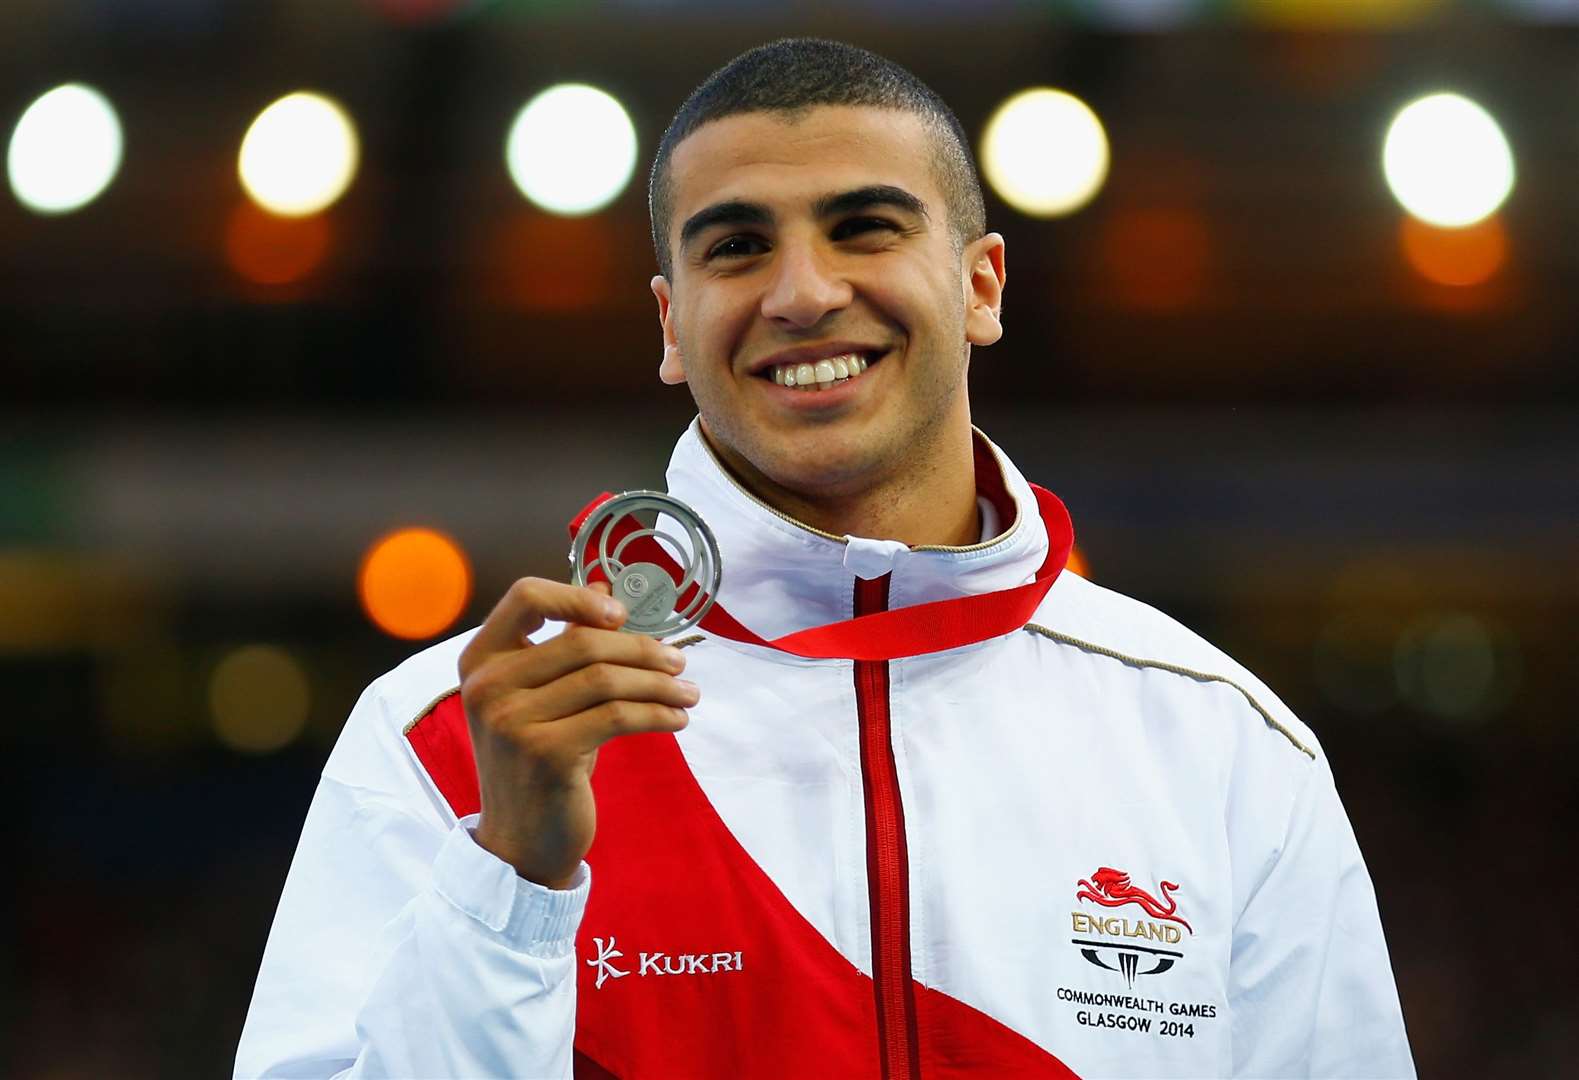 Adam Gemili won silver in the 2014 Commonwealth Games in Glasgow. Picture: Clive Rose/Getty Images